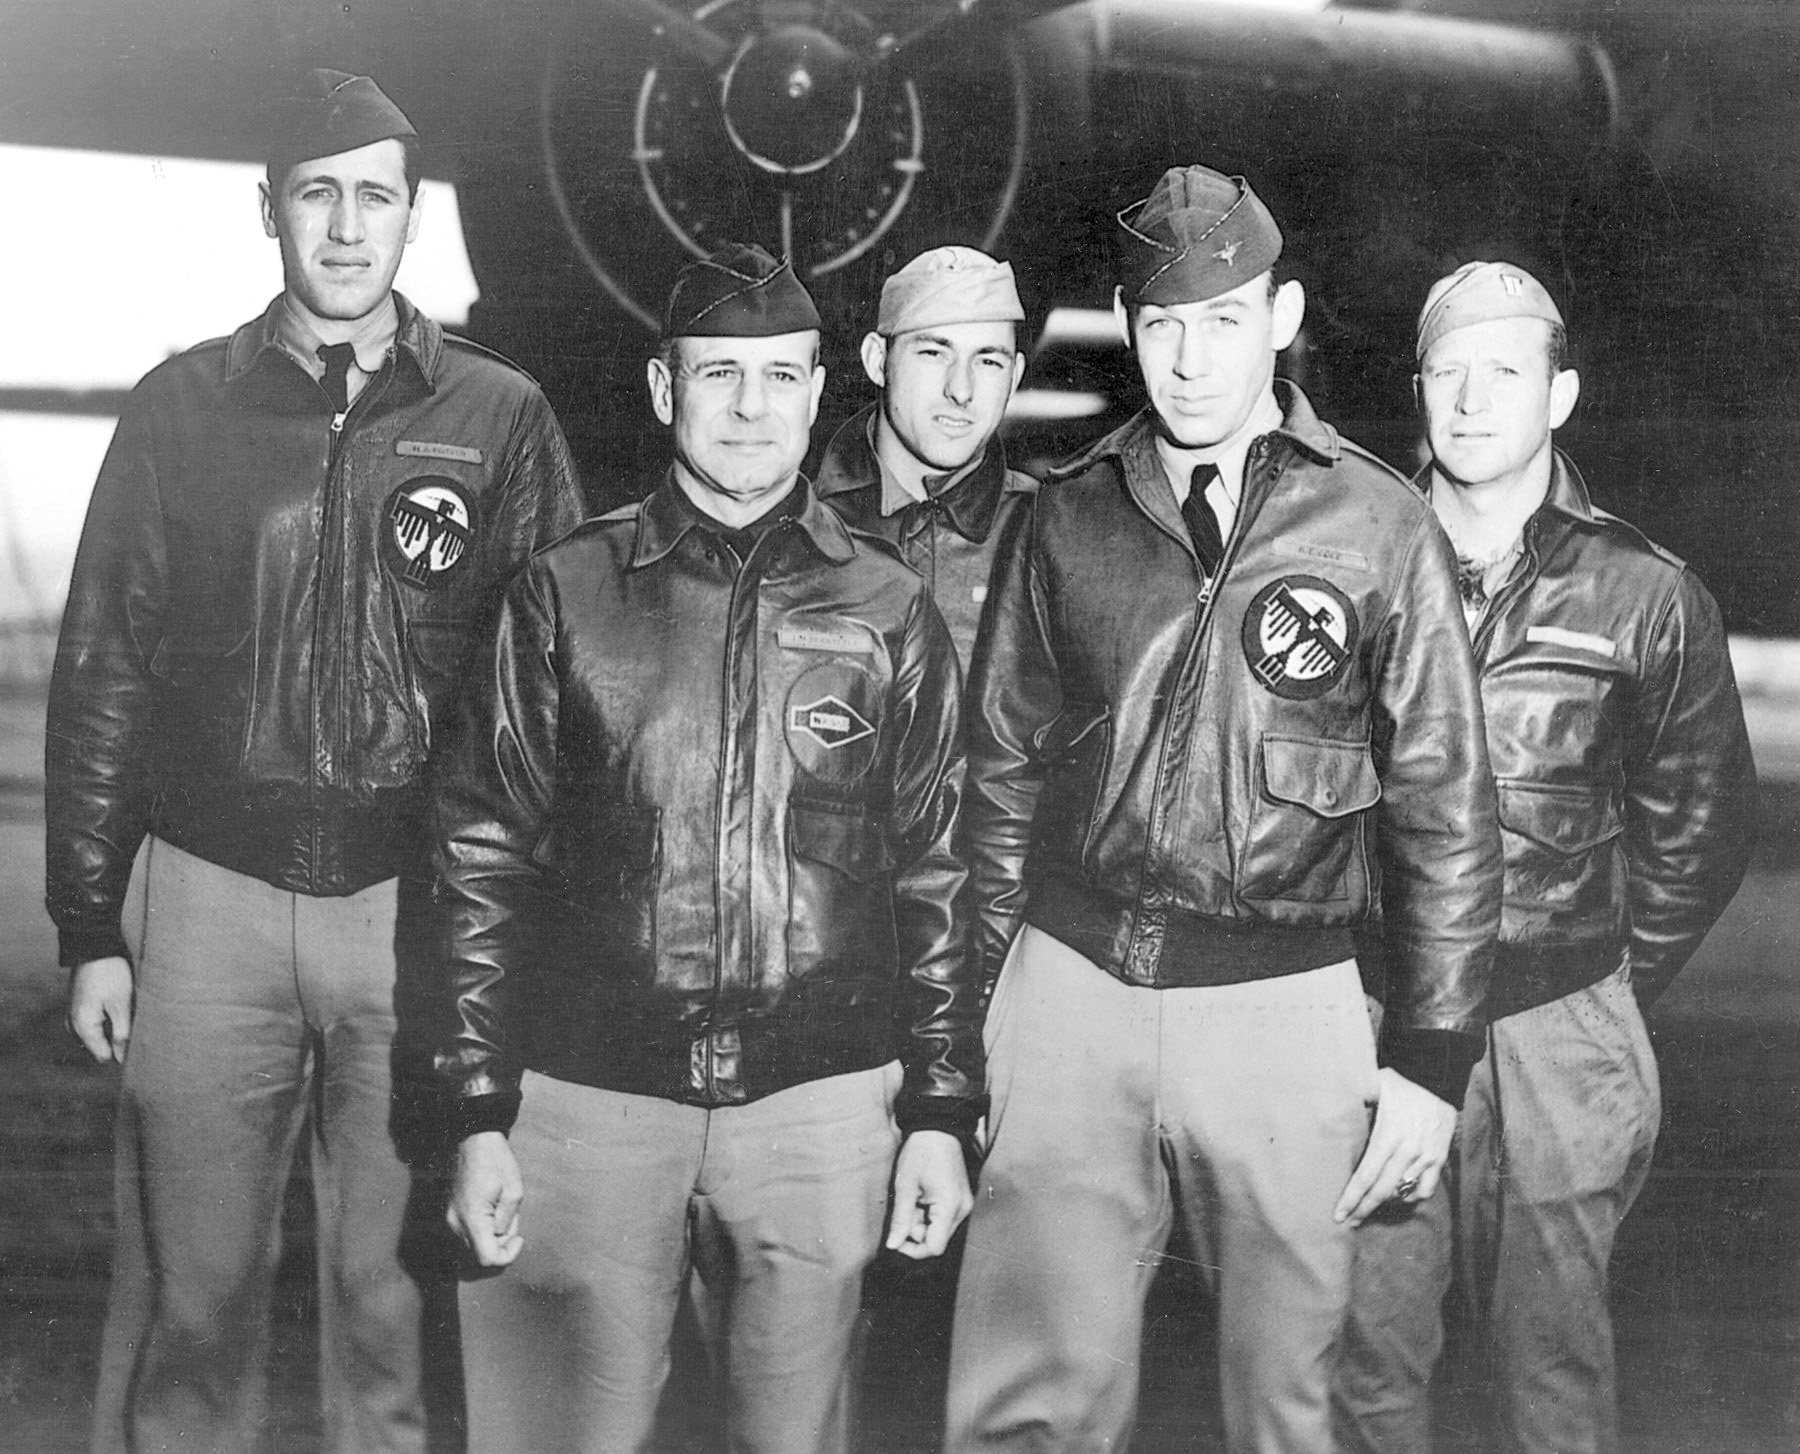 Doolittle and his crew pose prior to takeoff on the famed raid: (left to right) navigator Lt. Henry A. Potter, pilot Doolittle, bombardier Sgt. Fred A. Braemer, copilot Lt. Richard E. Cole, and gunner Sgt. Paul J. Leonard. 